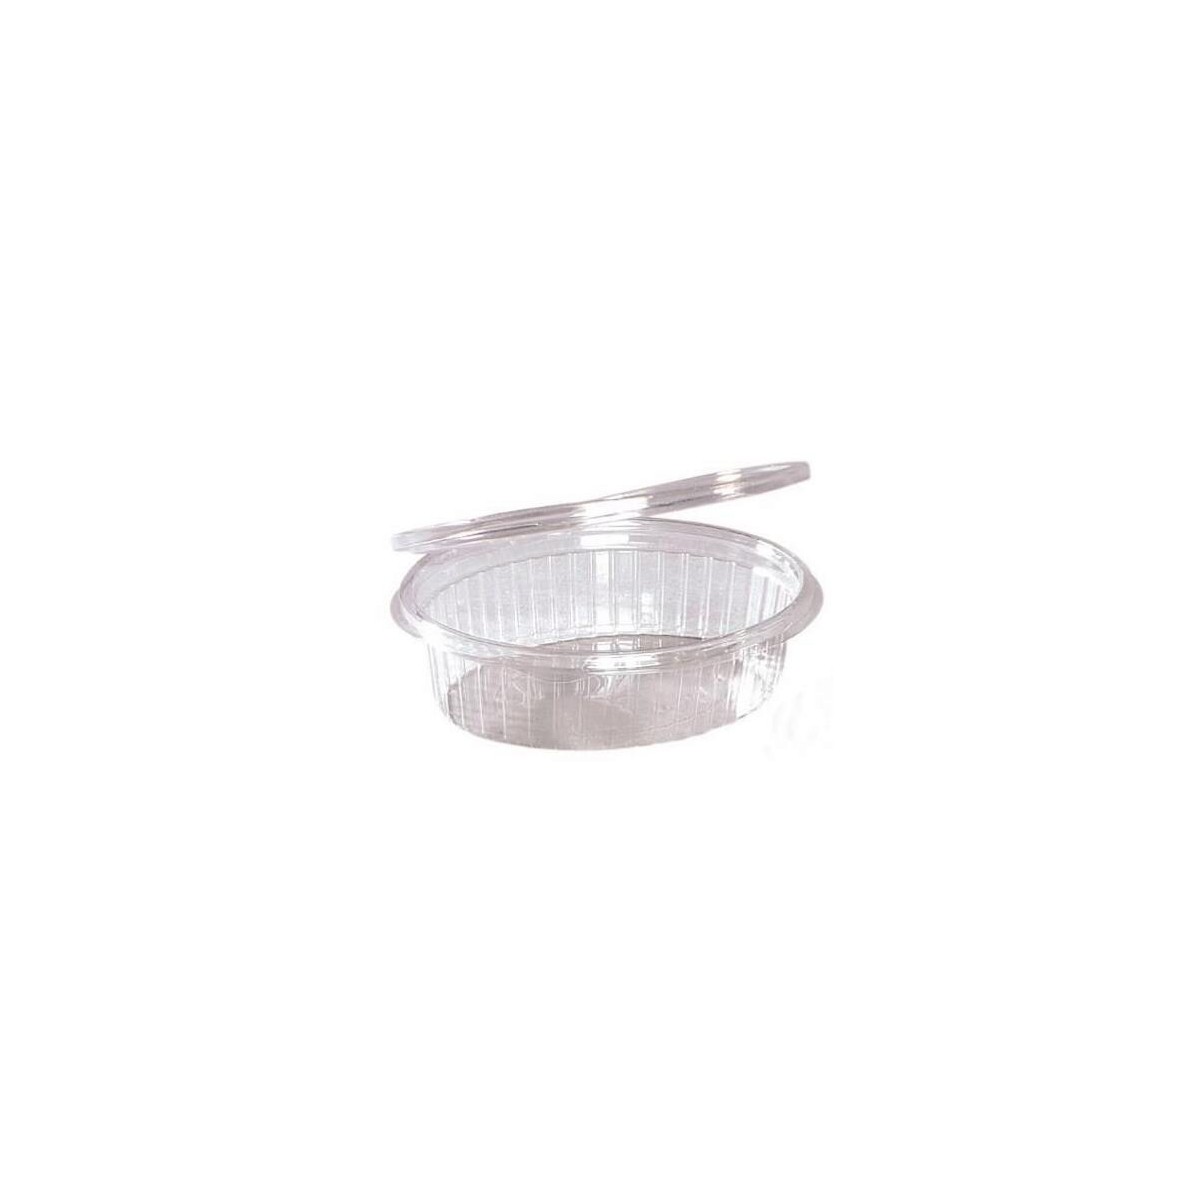 BARQUETTE OVALE ELIPACK 166X129X55MM COUVERCLE A  CHARNIERE 500ML 100PCES 